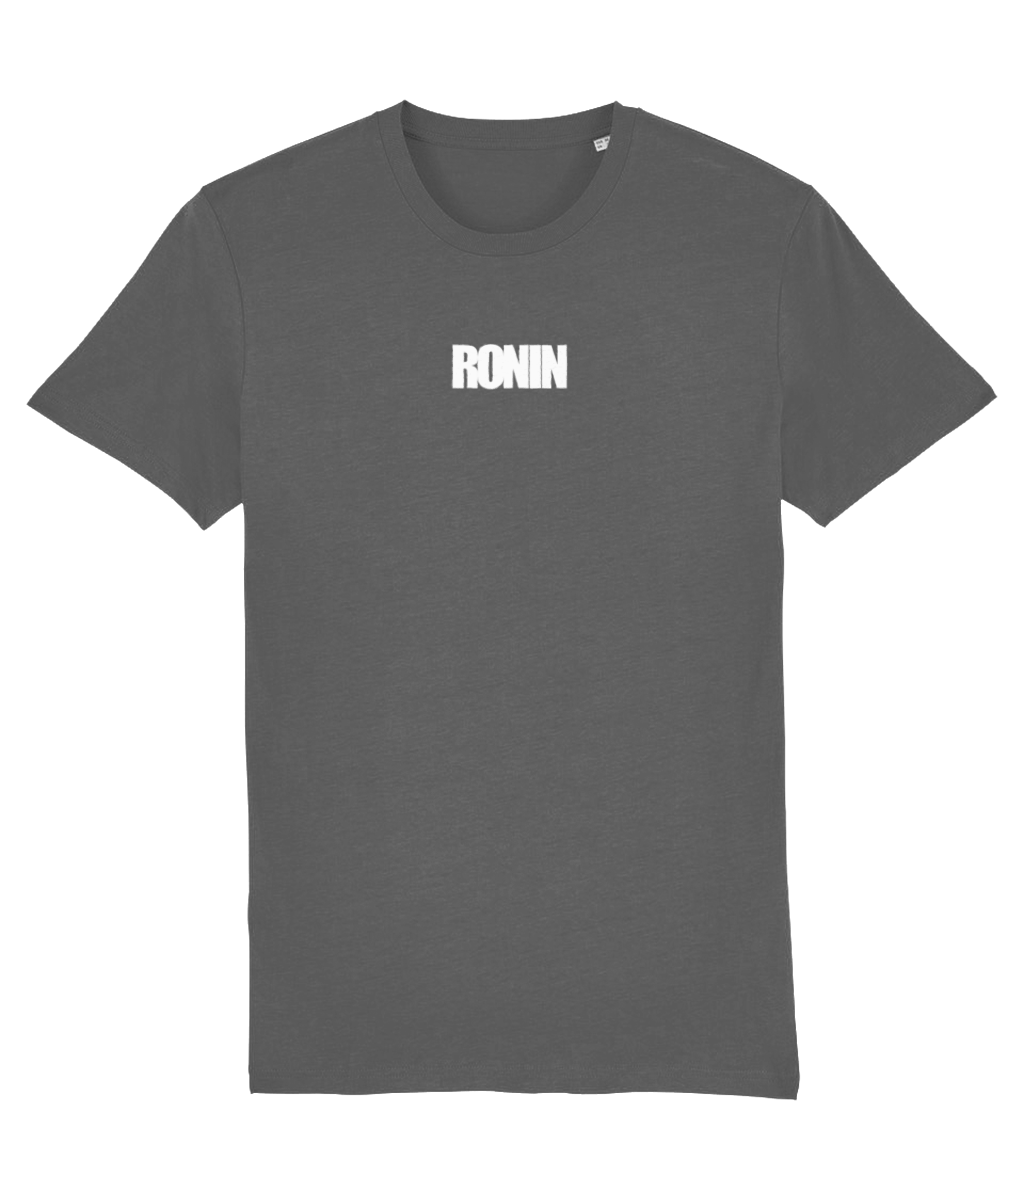 Punch Out Ronin tee